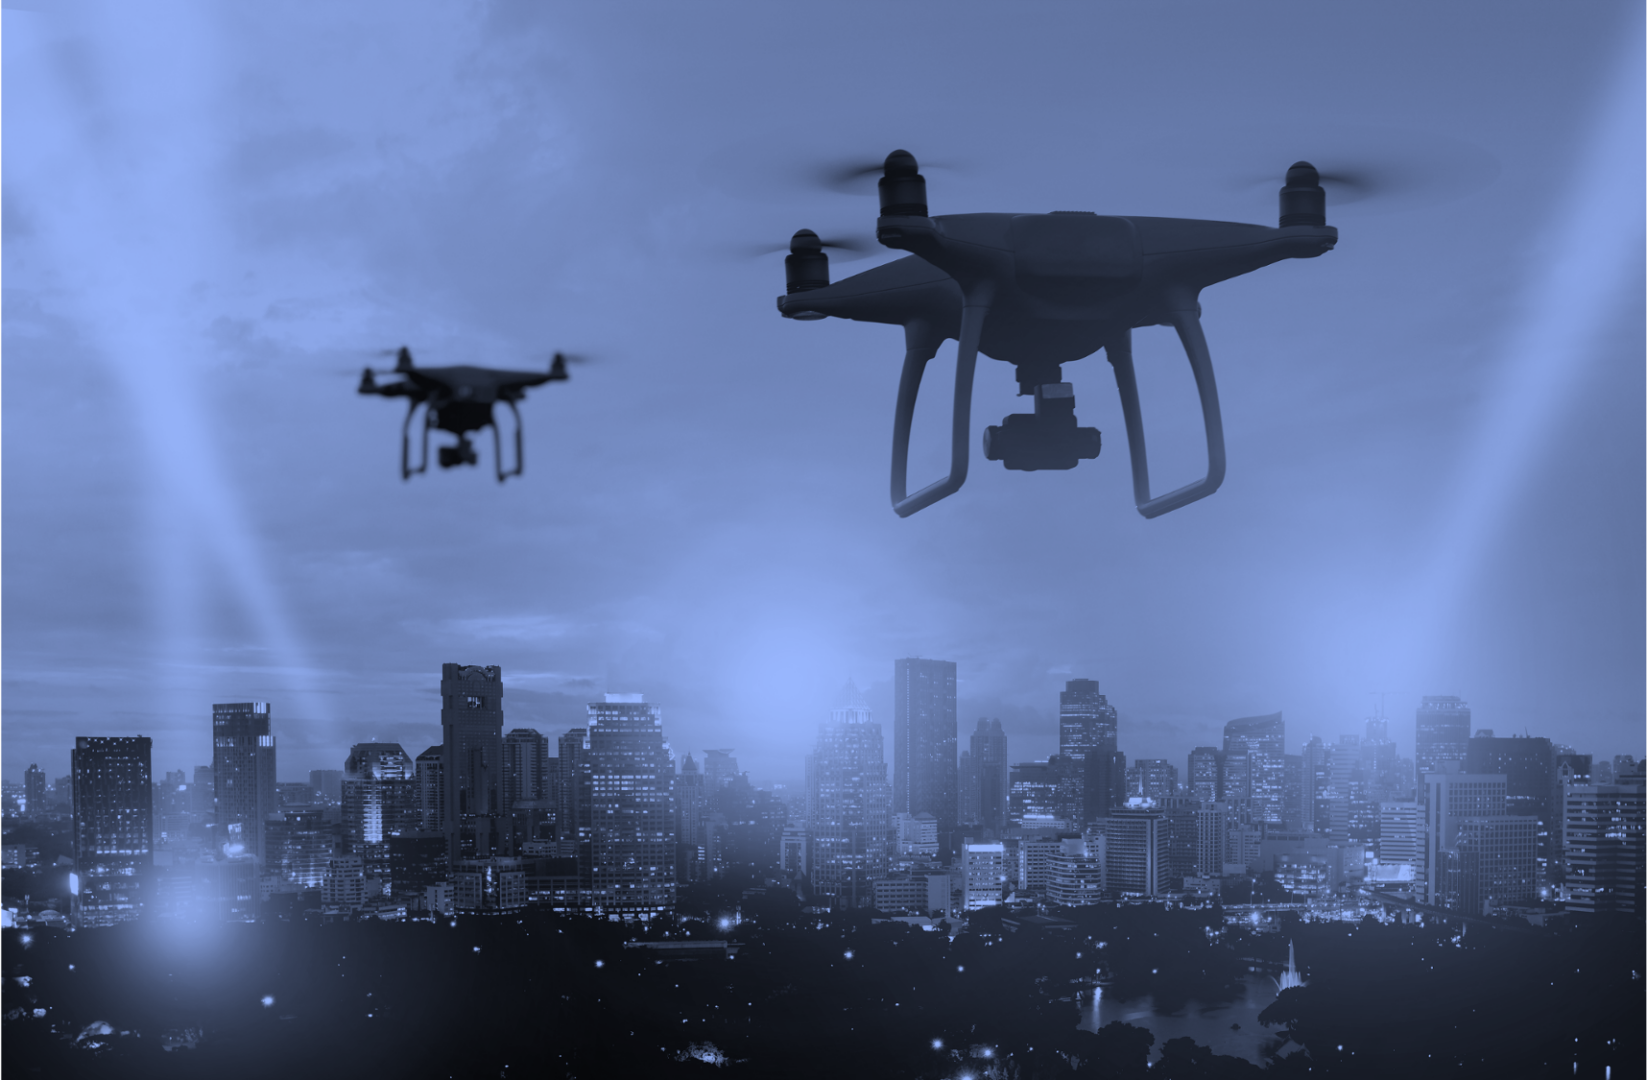 Two drones flying over a city with buildings in the background.